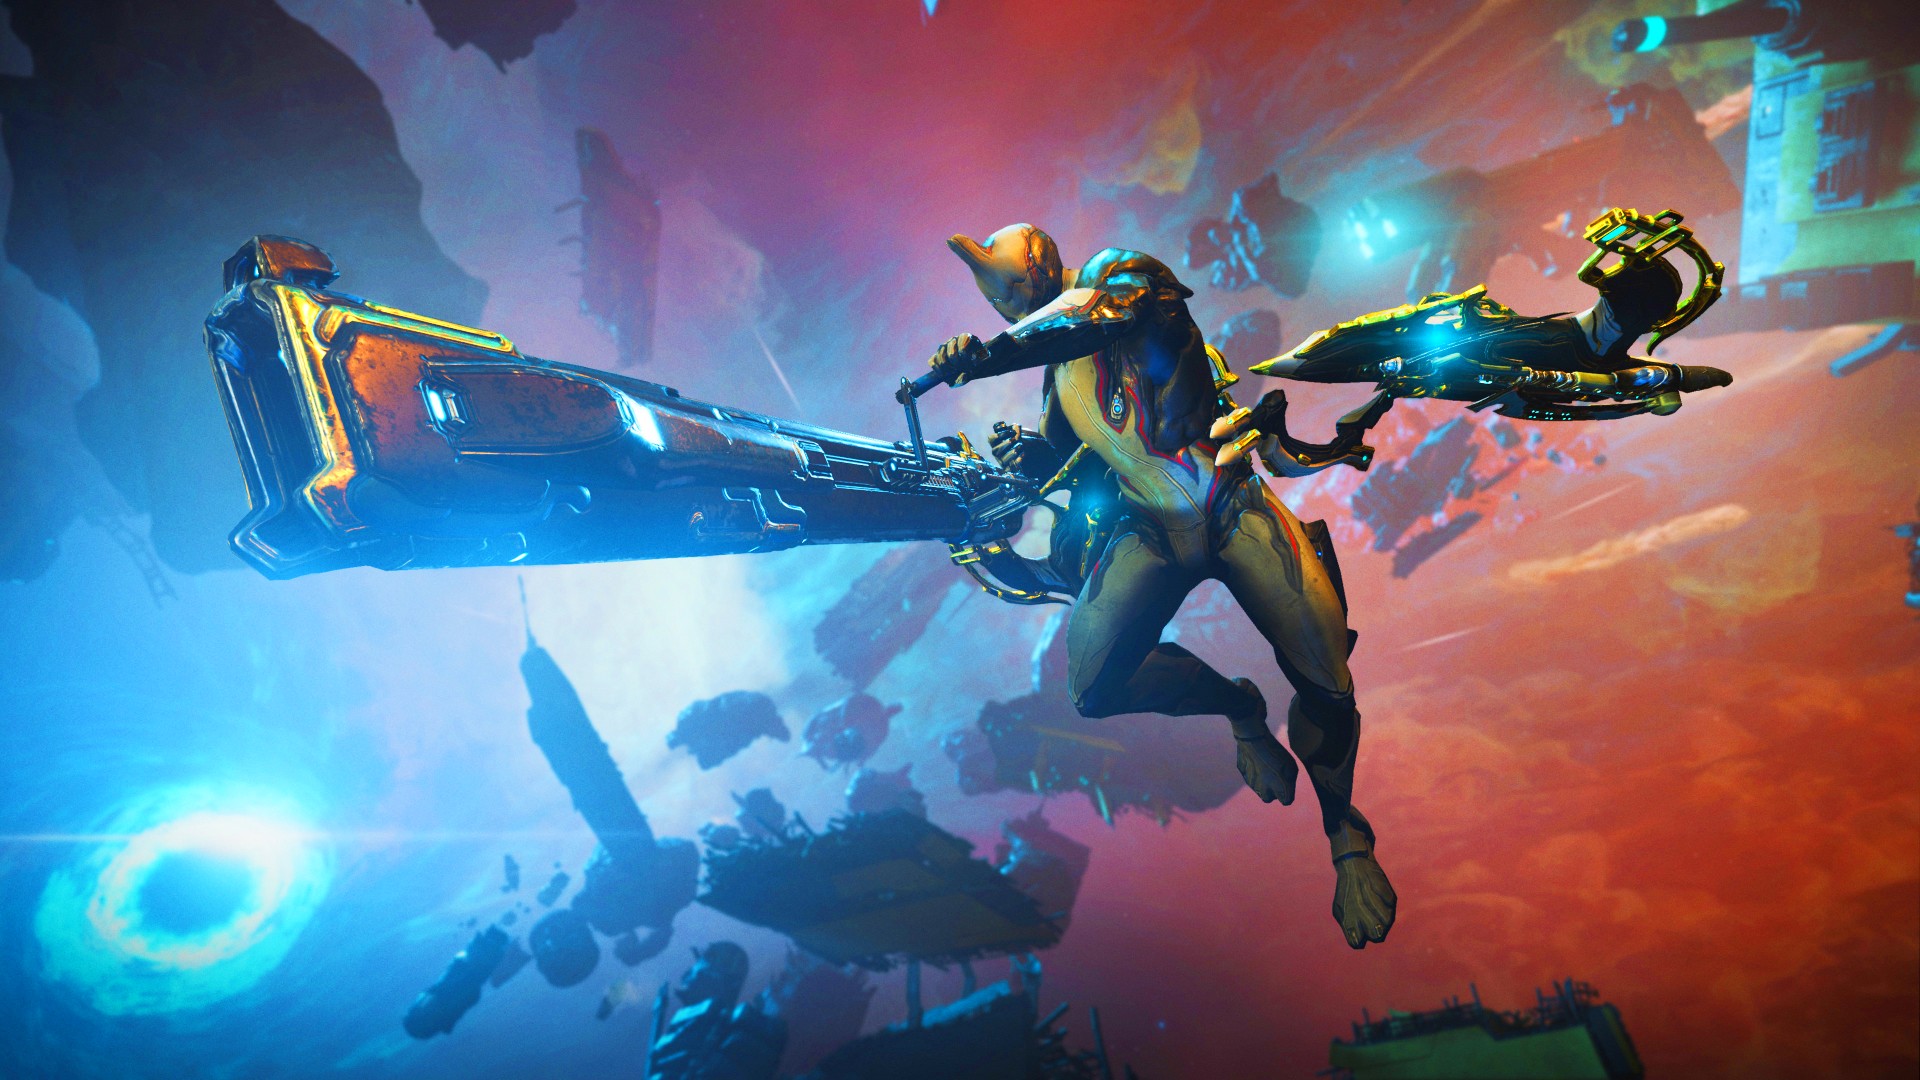 Warframe crossplay is finally here as free Steam game gets new update